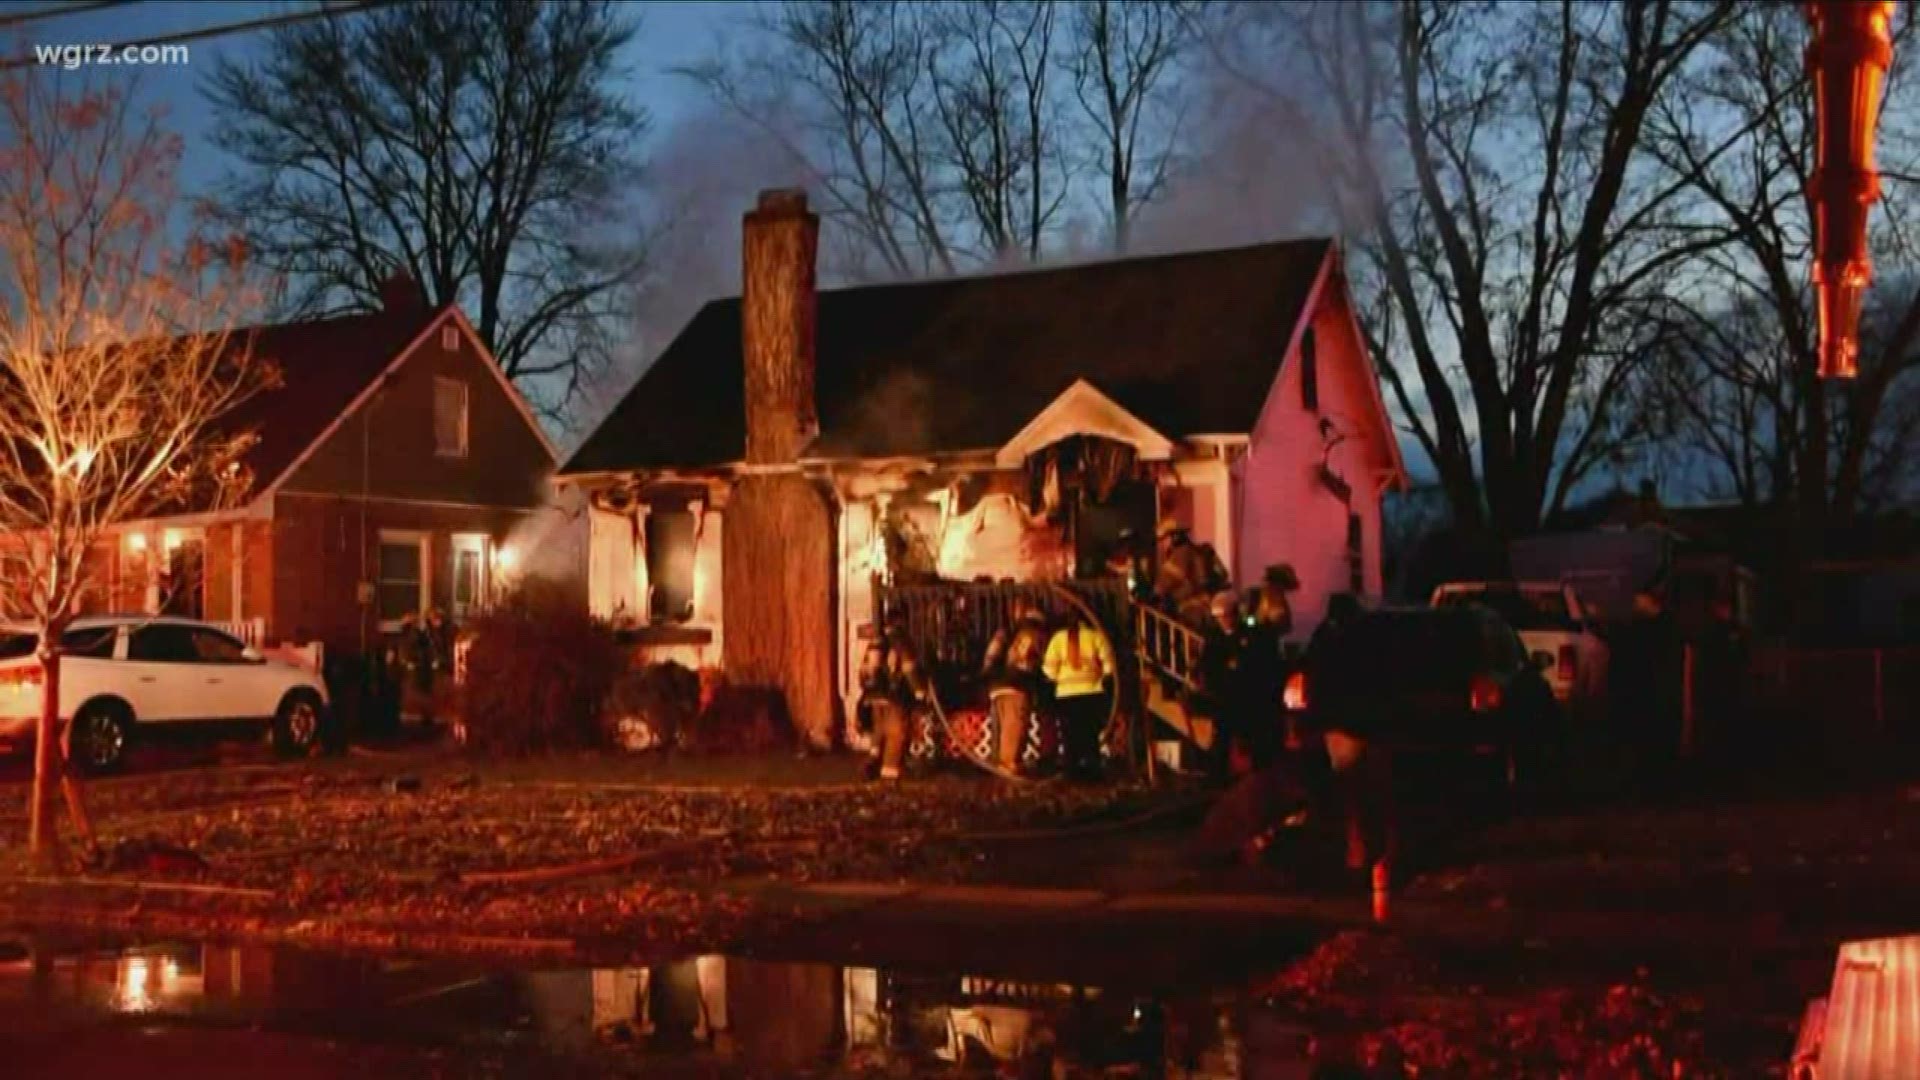 Two adults are without a home and recovering tonight after a house fire in Niagara Falls. Firefighters responded around 6:30 this morning on 90th Street.